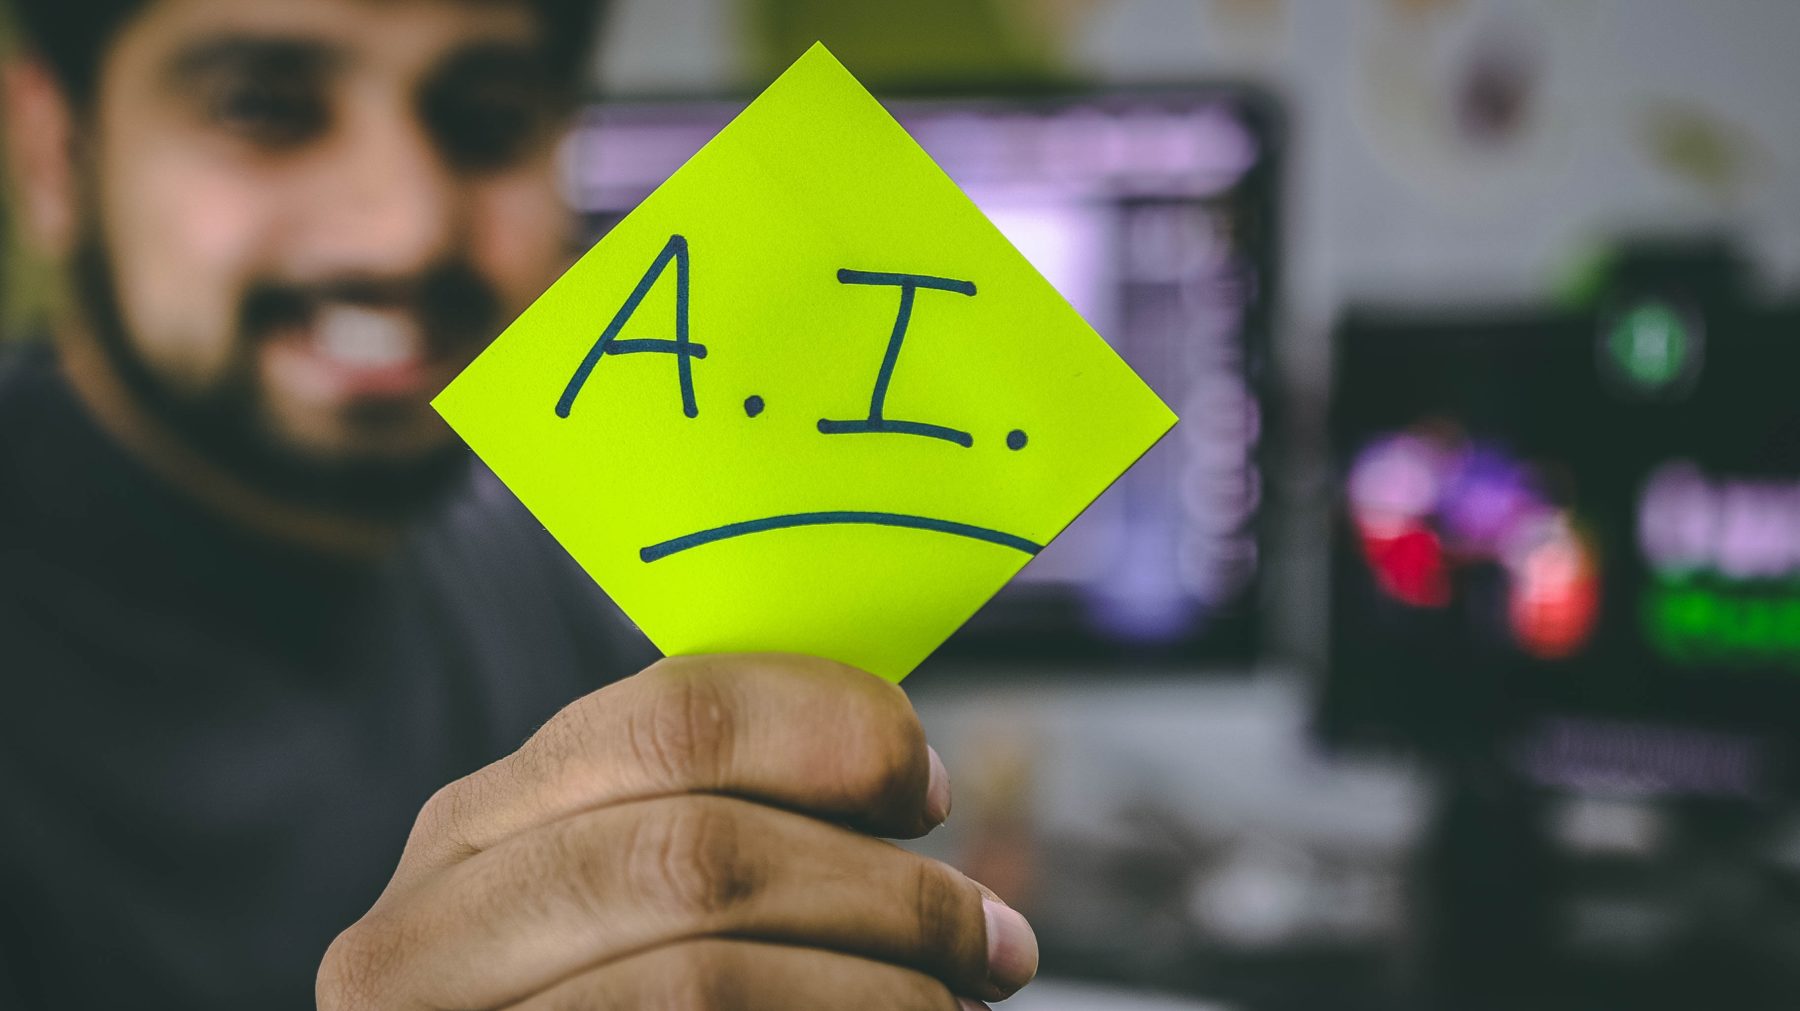 A man holding up bright, yellow sticky note with "A.I." written on it.